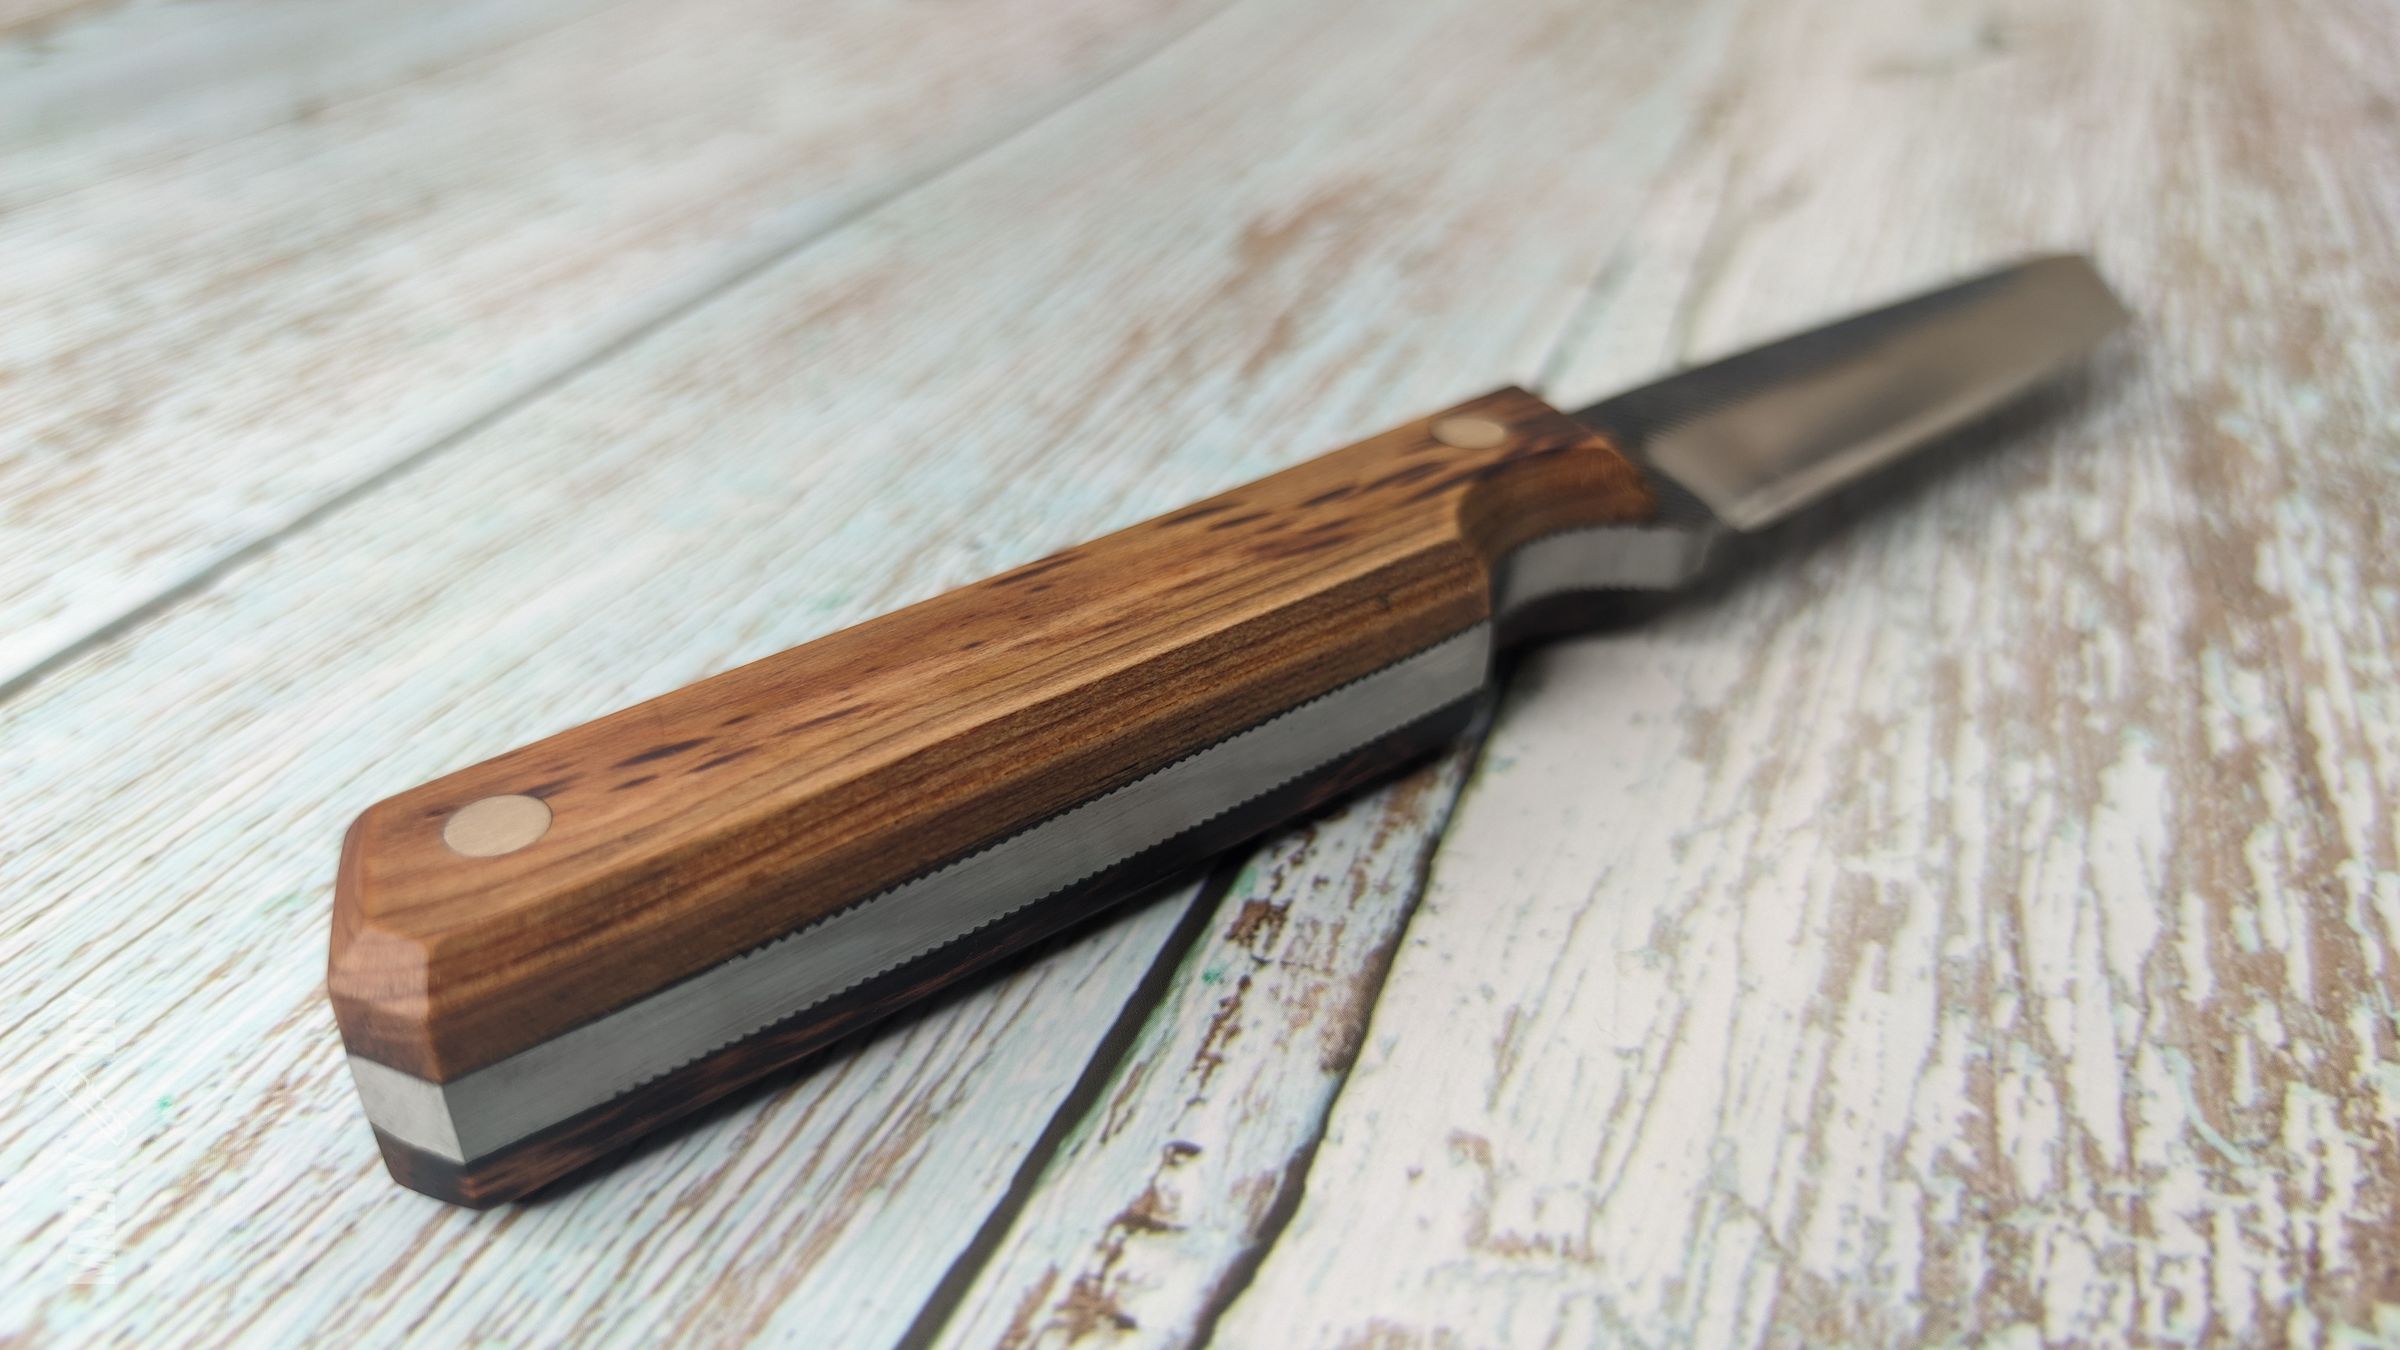 https://www.homemadetools.net/forum/attachments/making-japanese-tanto-knife-old-file-%5Bwithout-power-tools%5D-file-tanto-knife-1.jpg-45212d1679946345